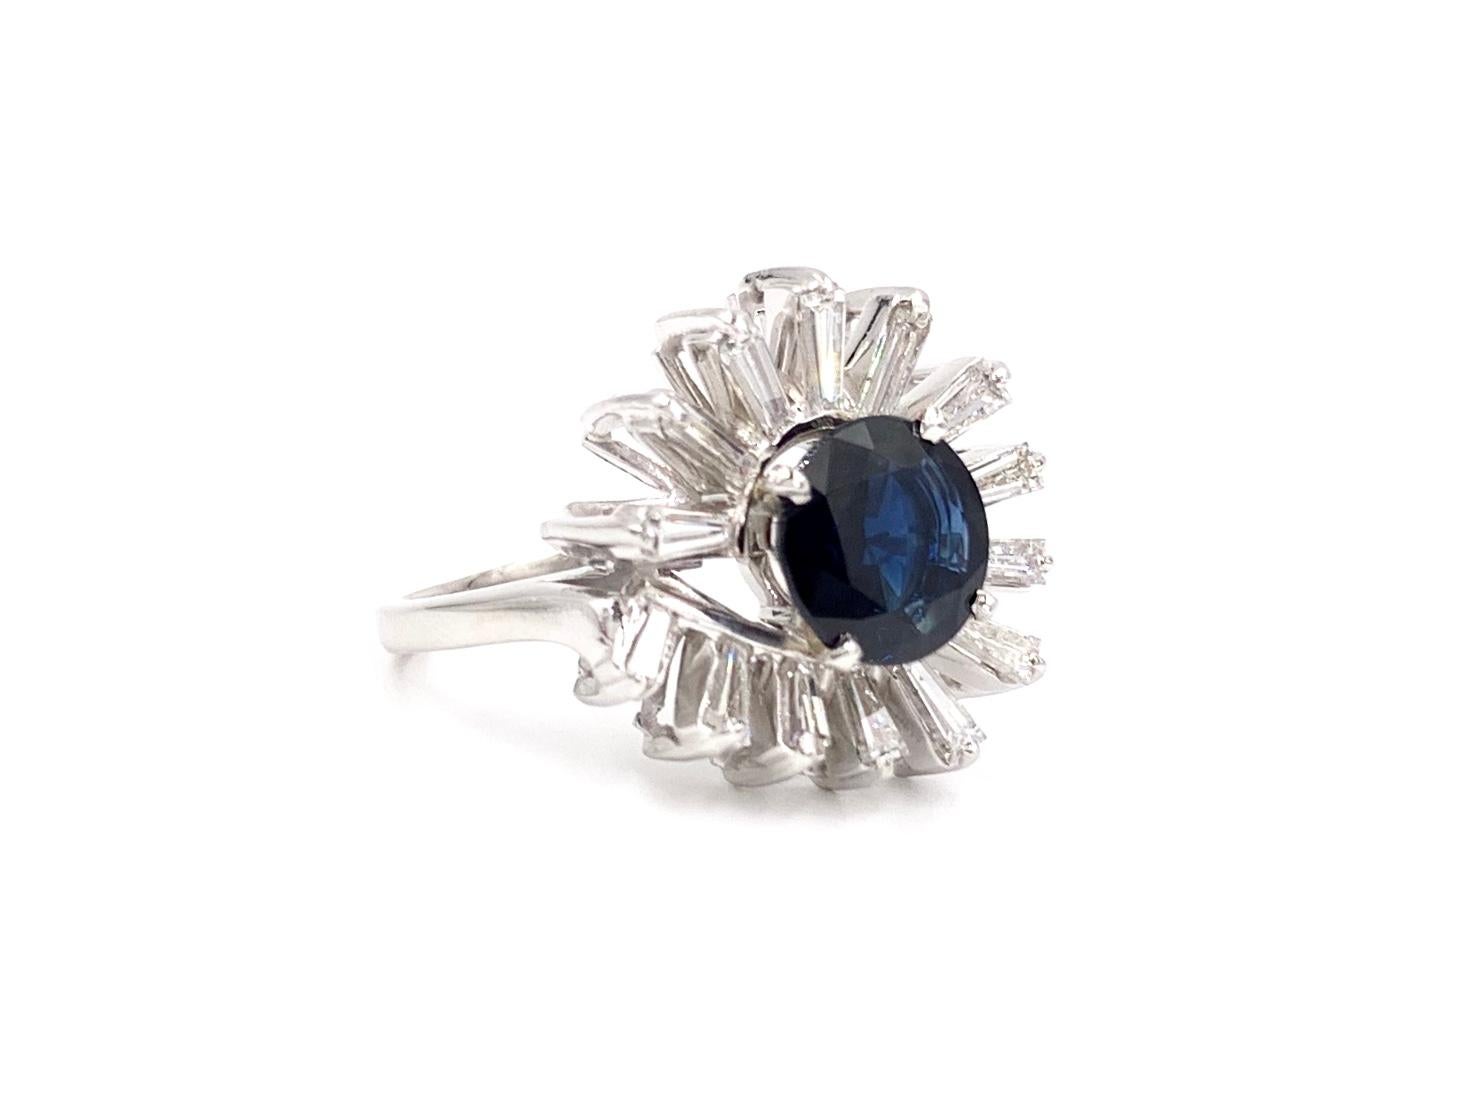 Fashionable and modern designed platinum baguette diamond and 2.63 carat round deep blue sapphire ring. 14 vibrant baguette diamonds have an approximate total weight of 1.25 carats with approximately F color, VS2 clarity. Round blue sapphire has